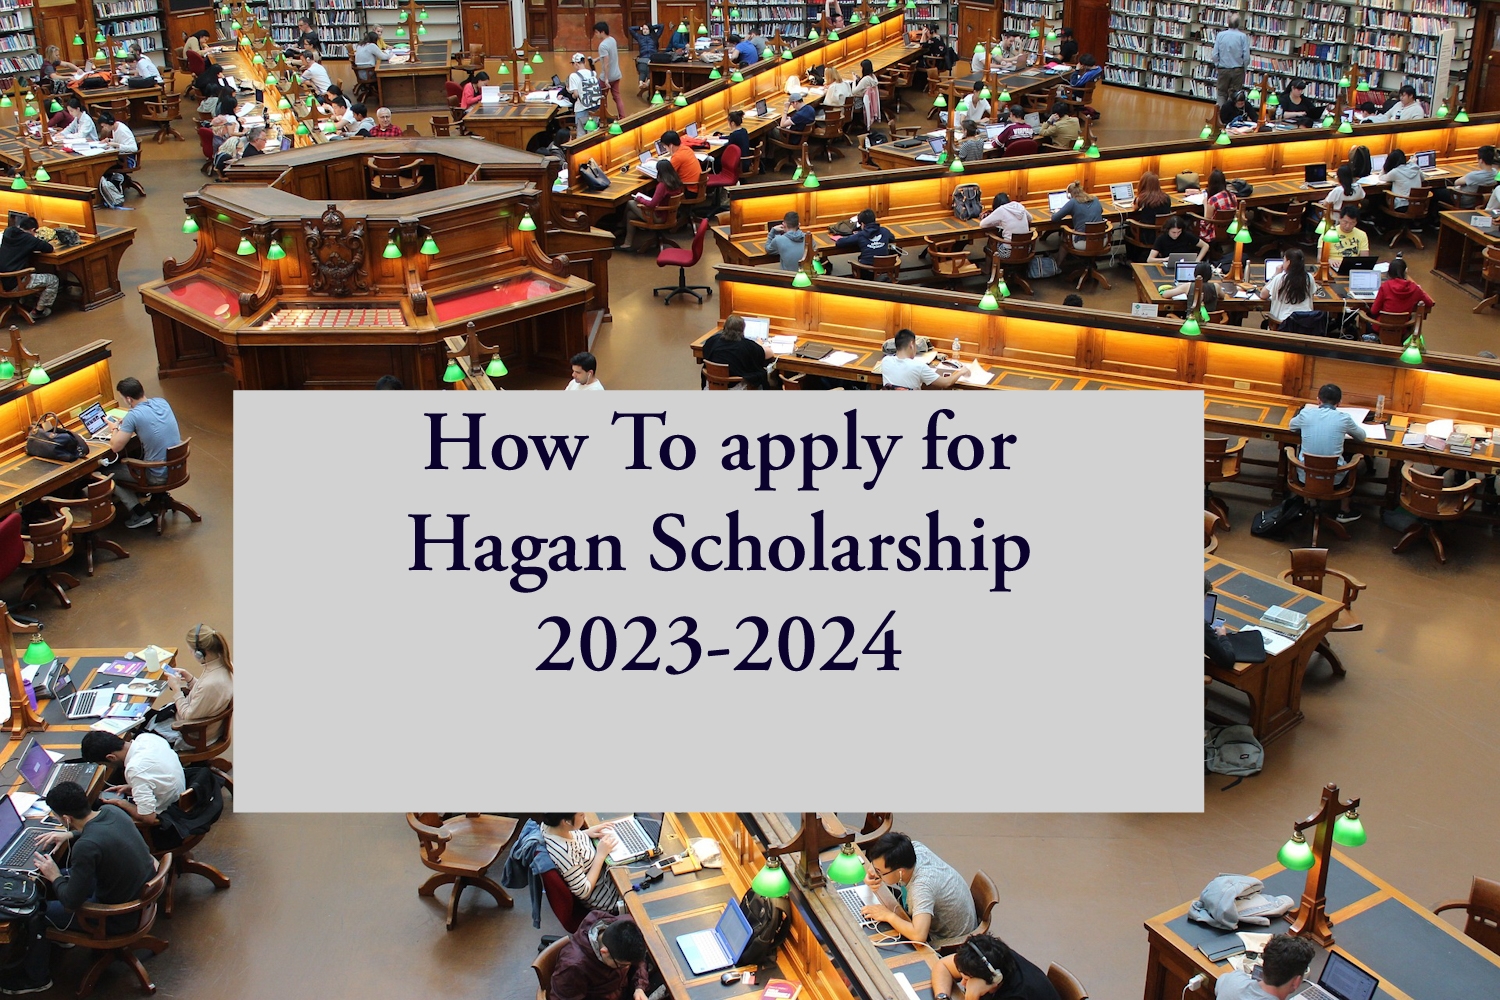 How To apply for Hagan Scholarship Application 2023-2024 